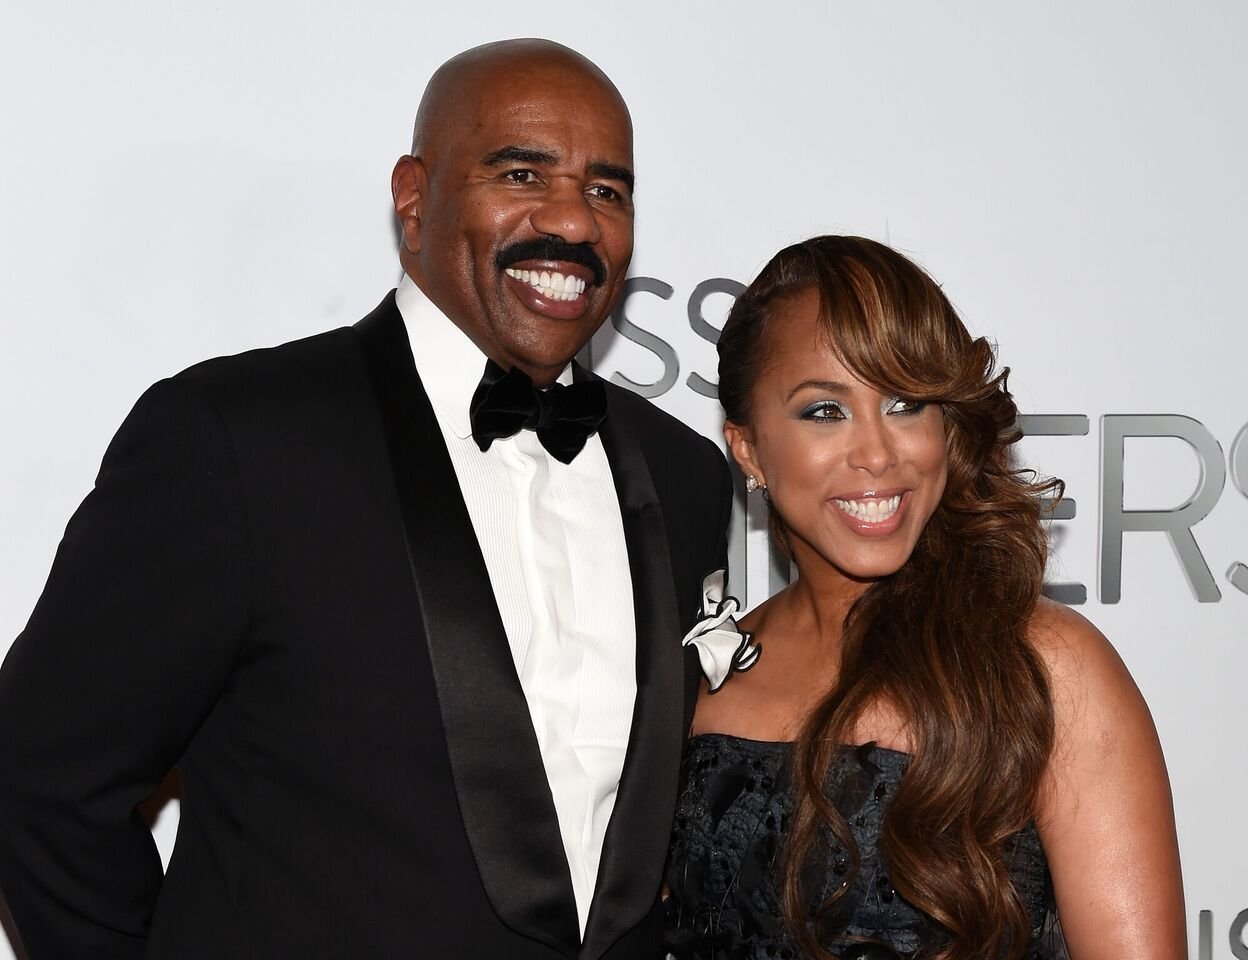 Steve Harvey and his wife Marjorie Harvey attend the 2015 Miss Universe Pageant at Planet Hollywood Resort & Casino on December 20, 2015 in Las Vegas, Nevada. | Source: Getty Images